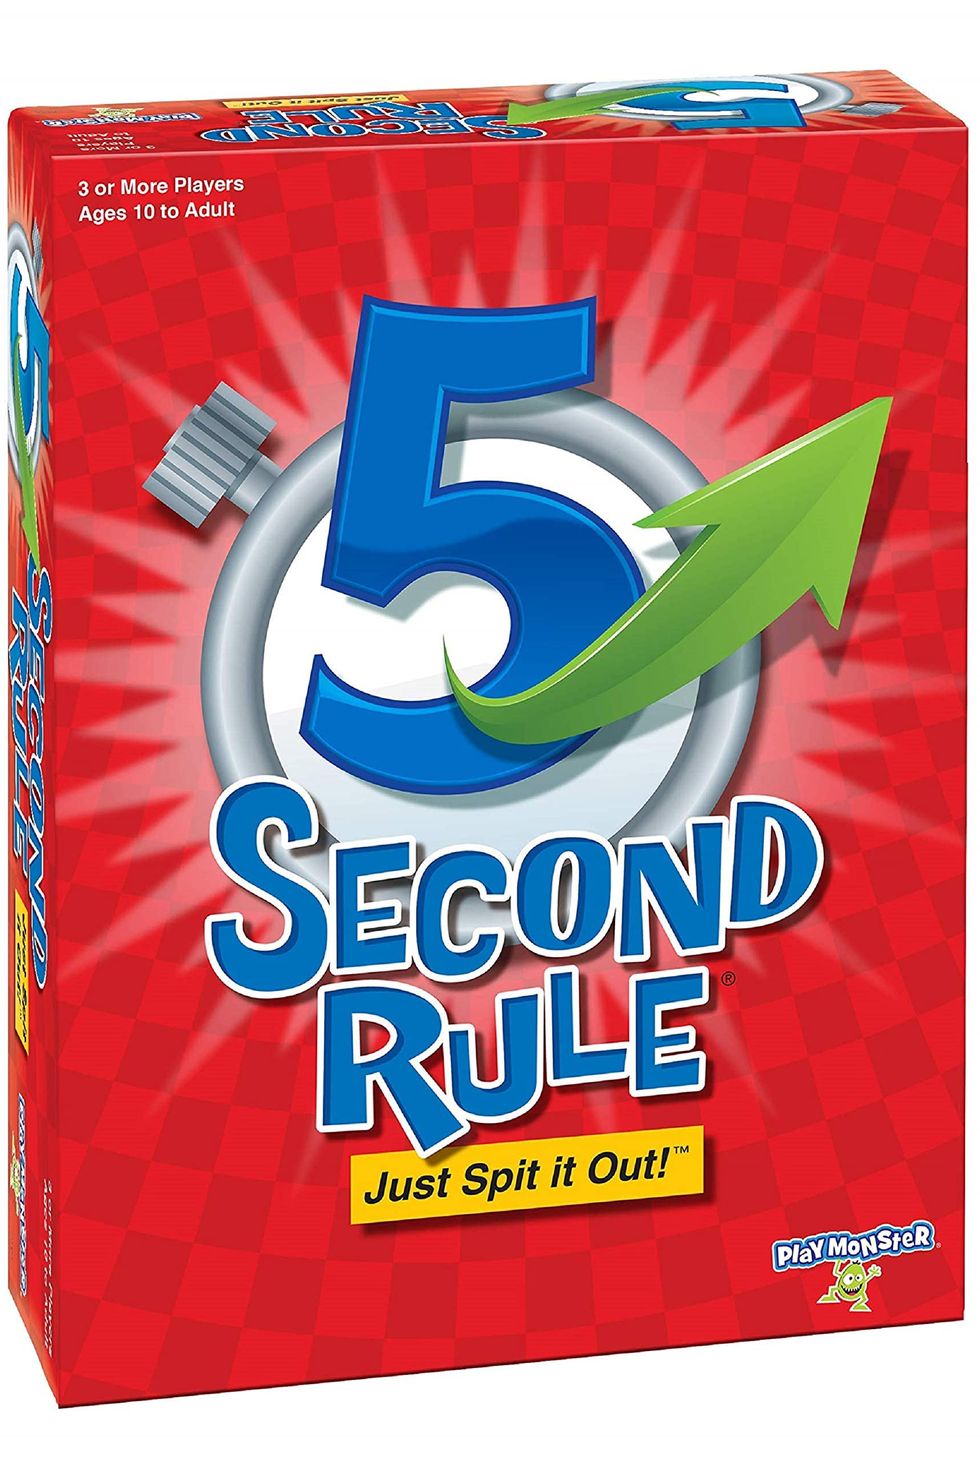 5 Second Rule 